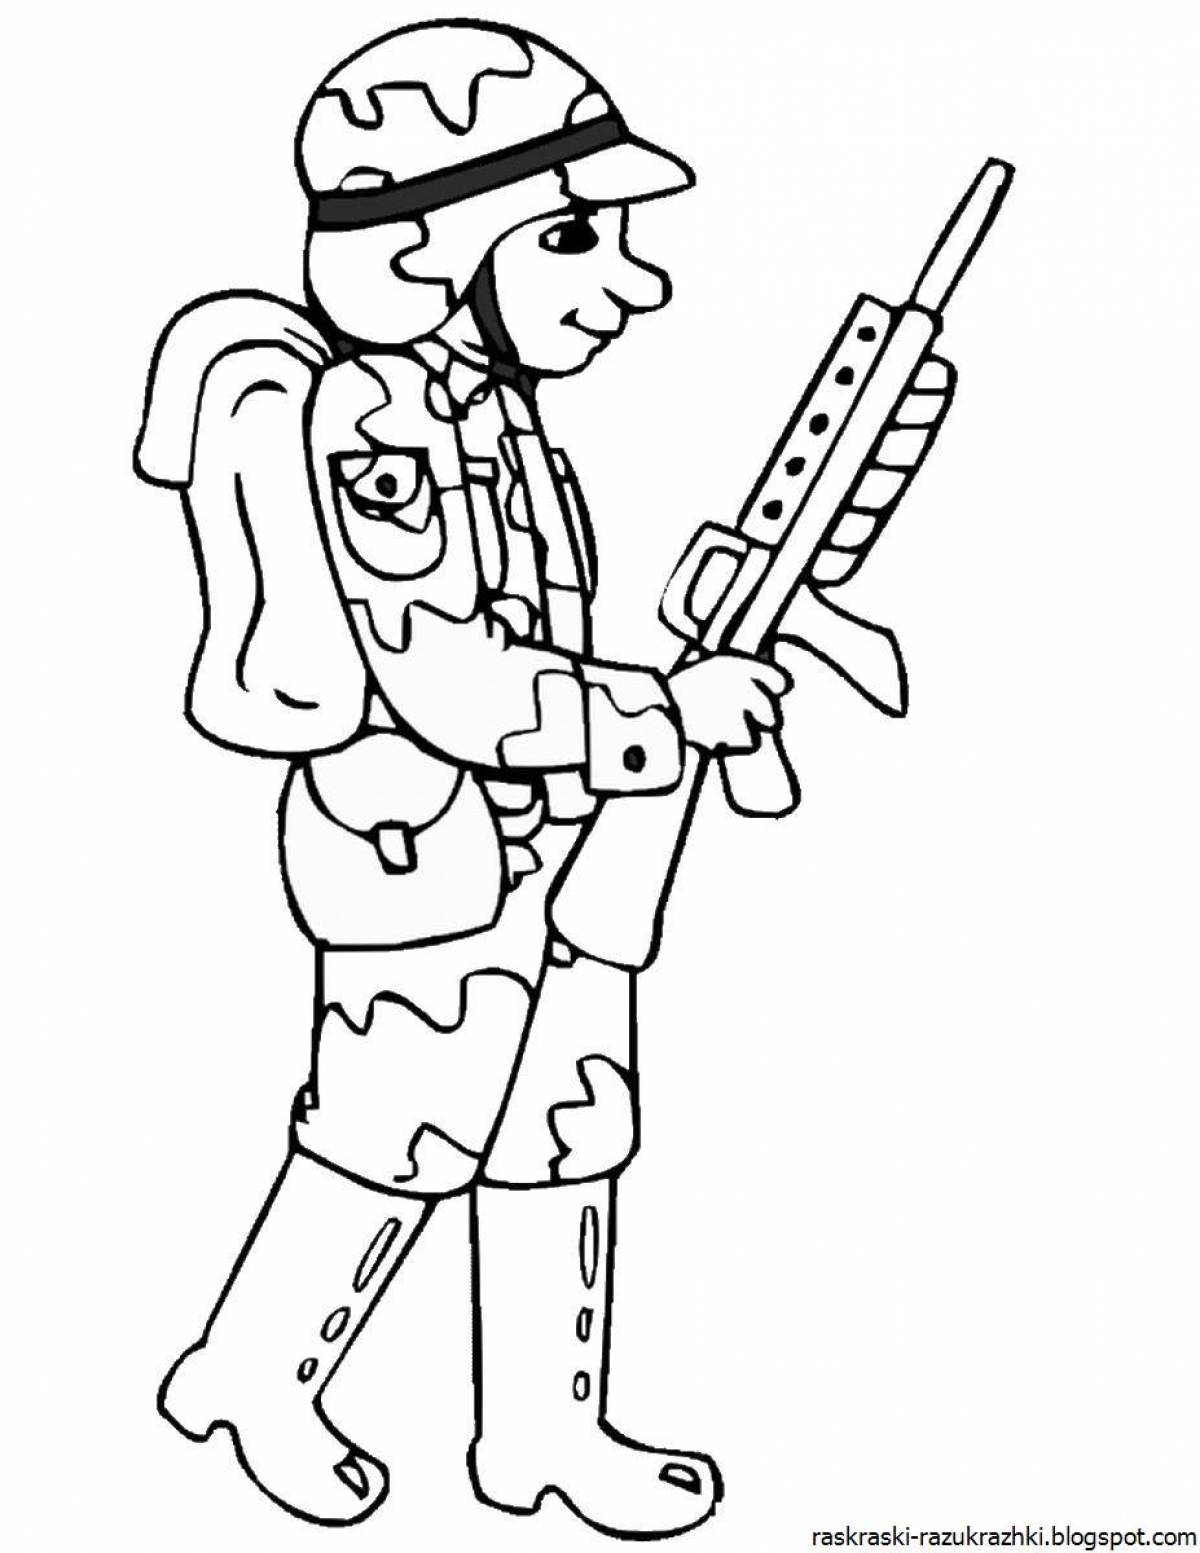 Adorable soldier coloring book for kids